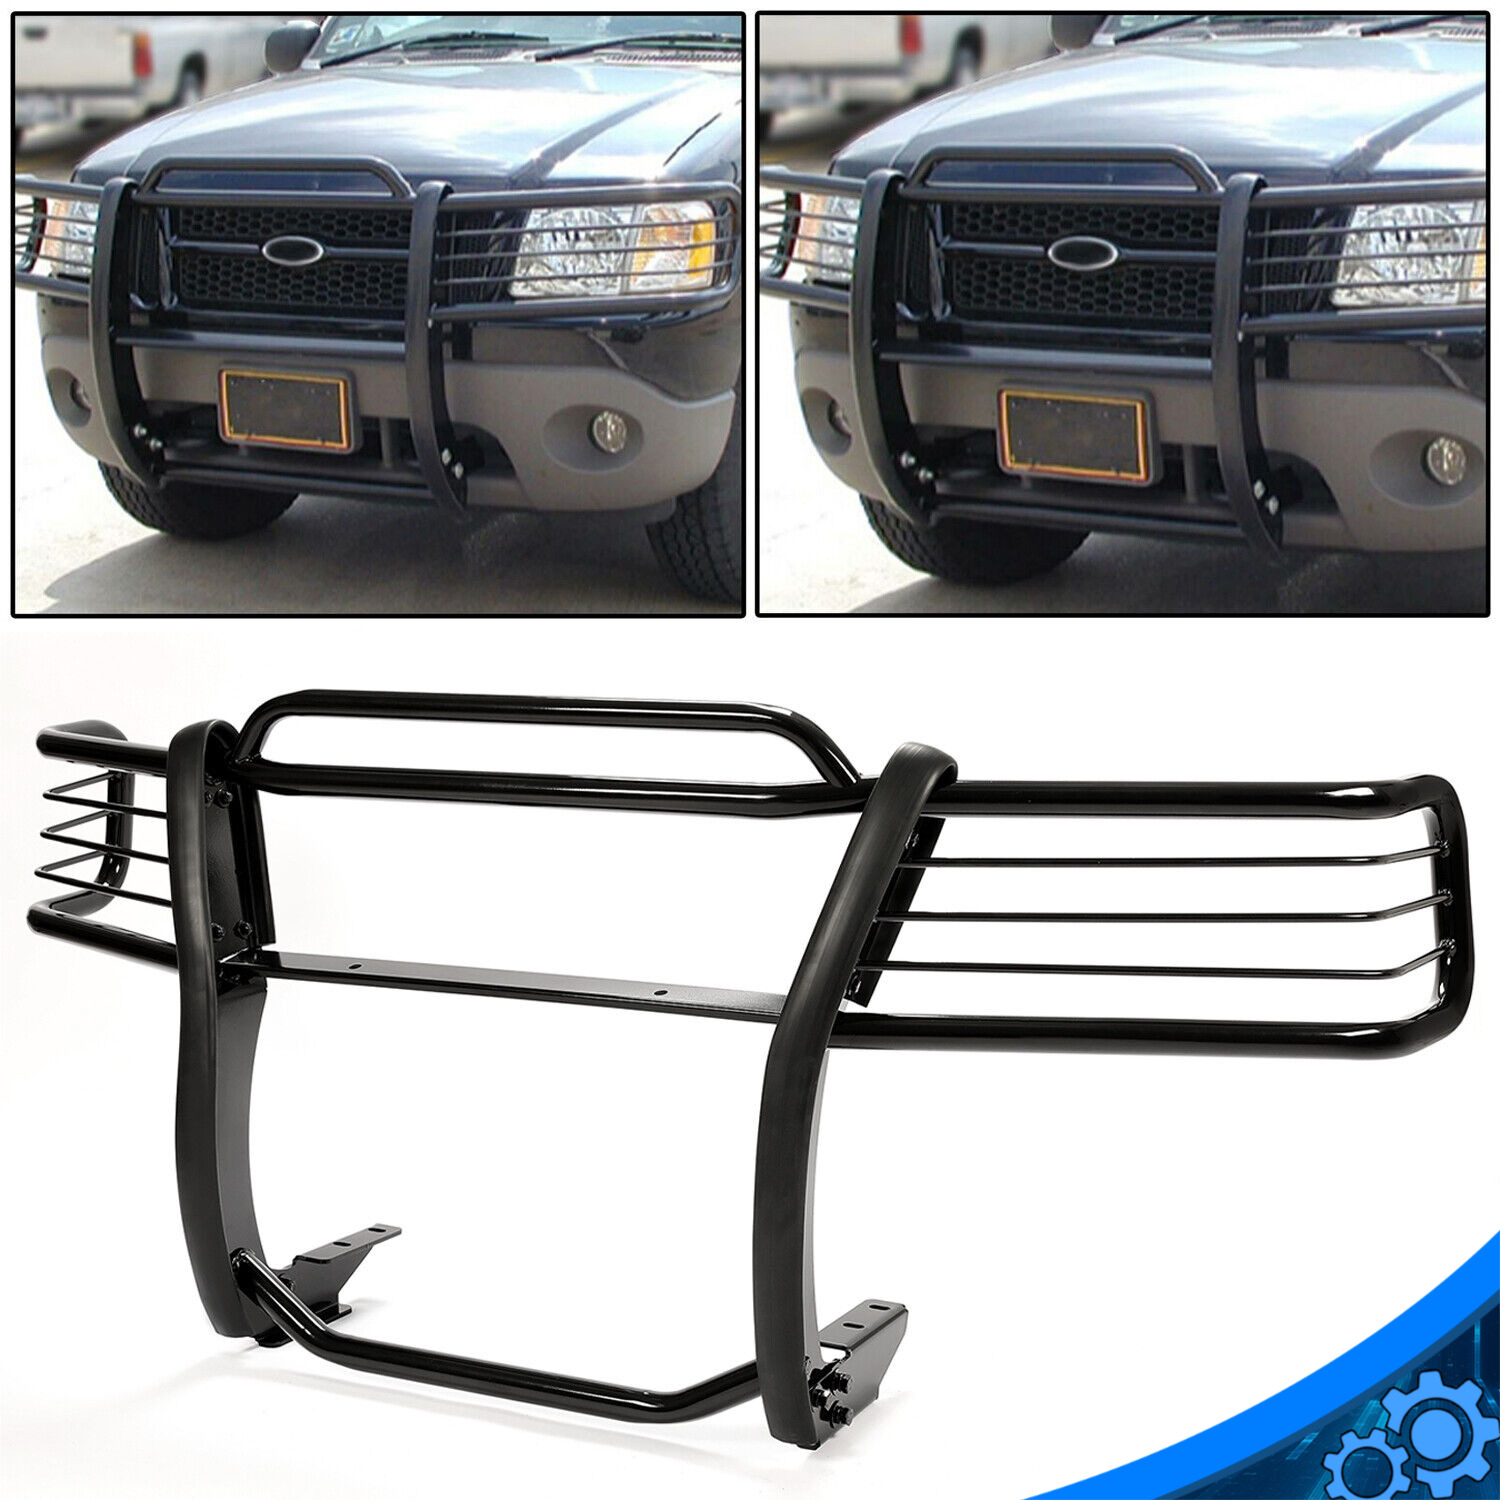 Fits 2002-2005 Ford Explorer 4DR 4-Door Grill Brush Guard Grille in black NEW